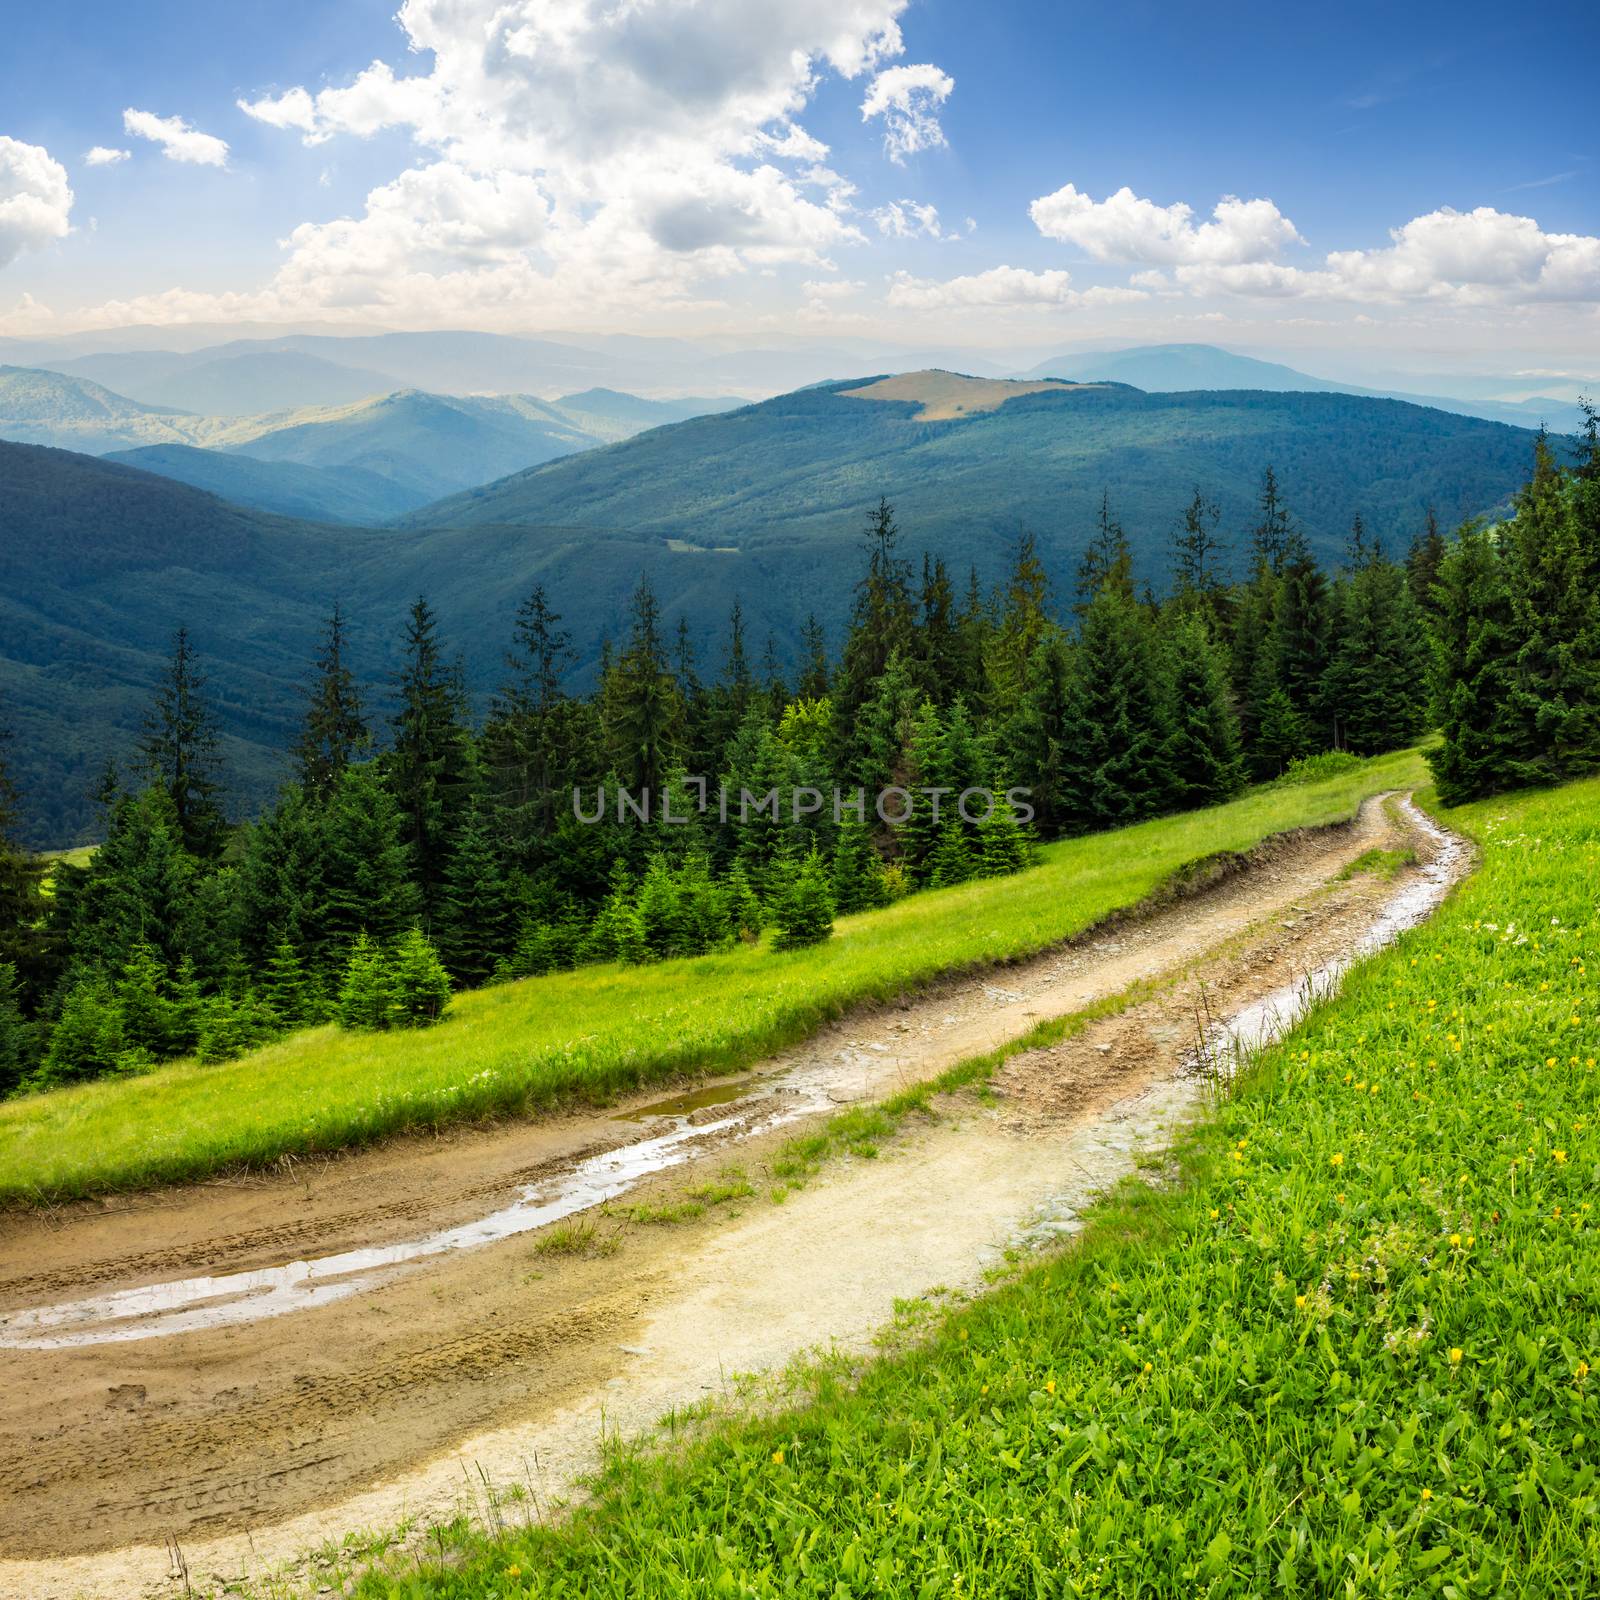 composite landscape with empty road to coniferous forest through the grassy hillside meadow on high mountain range in morning light